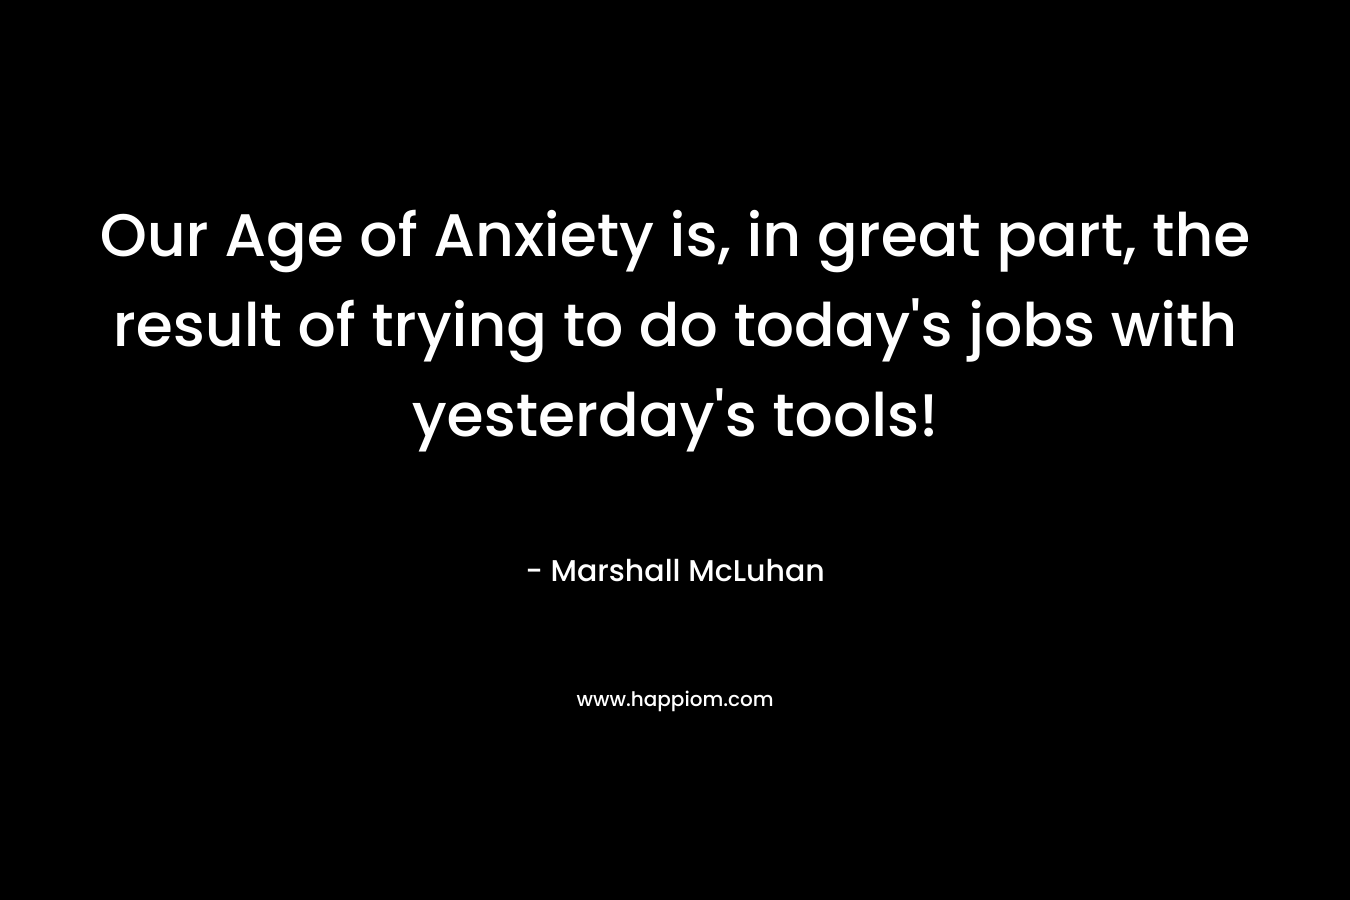 Our Age of Anxiety is, in great part, the result of trying to do today's jobs with yesterday's tools!